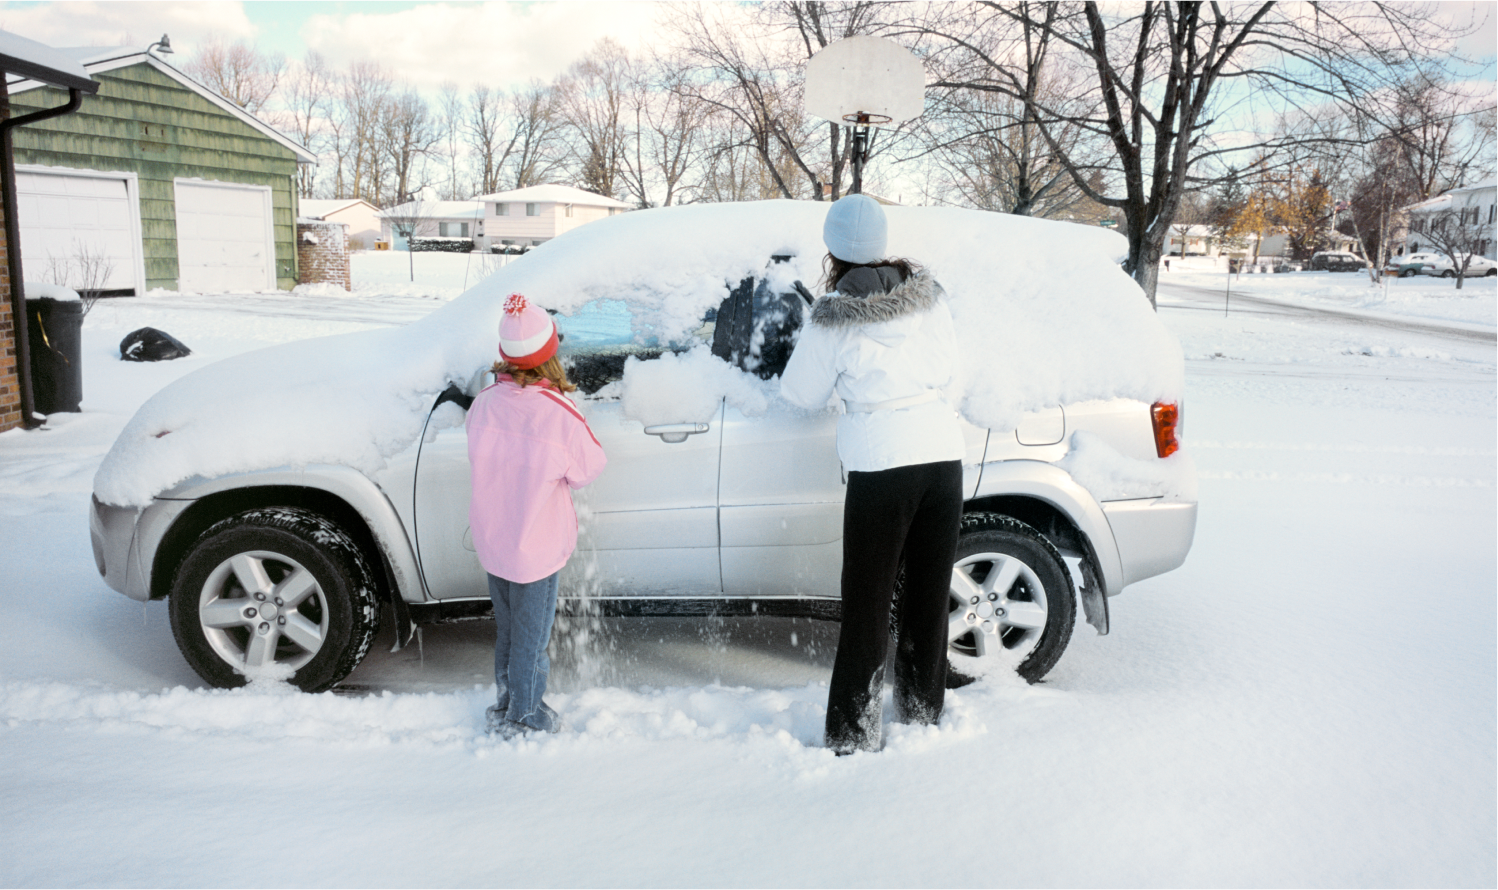 A mother and child wipe several inches of snow off their car in driveway.